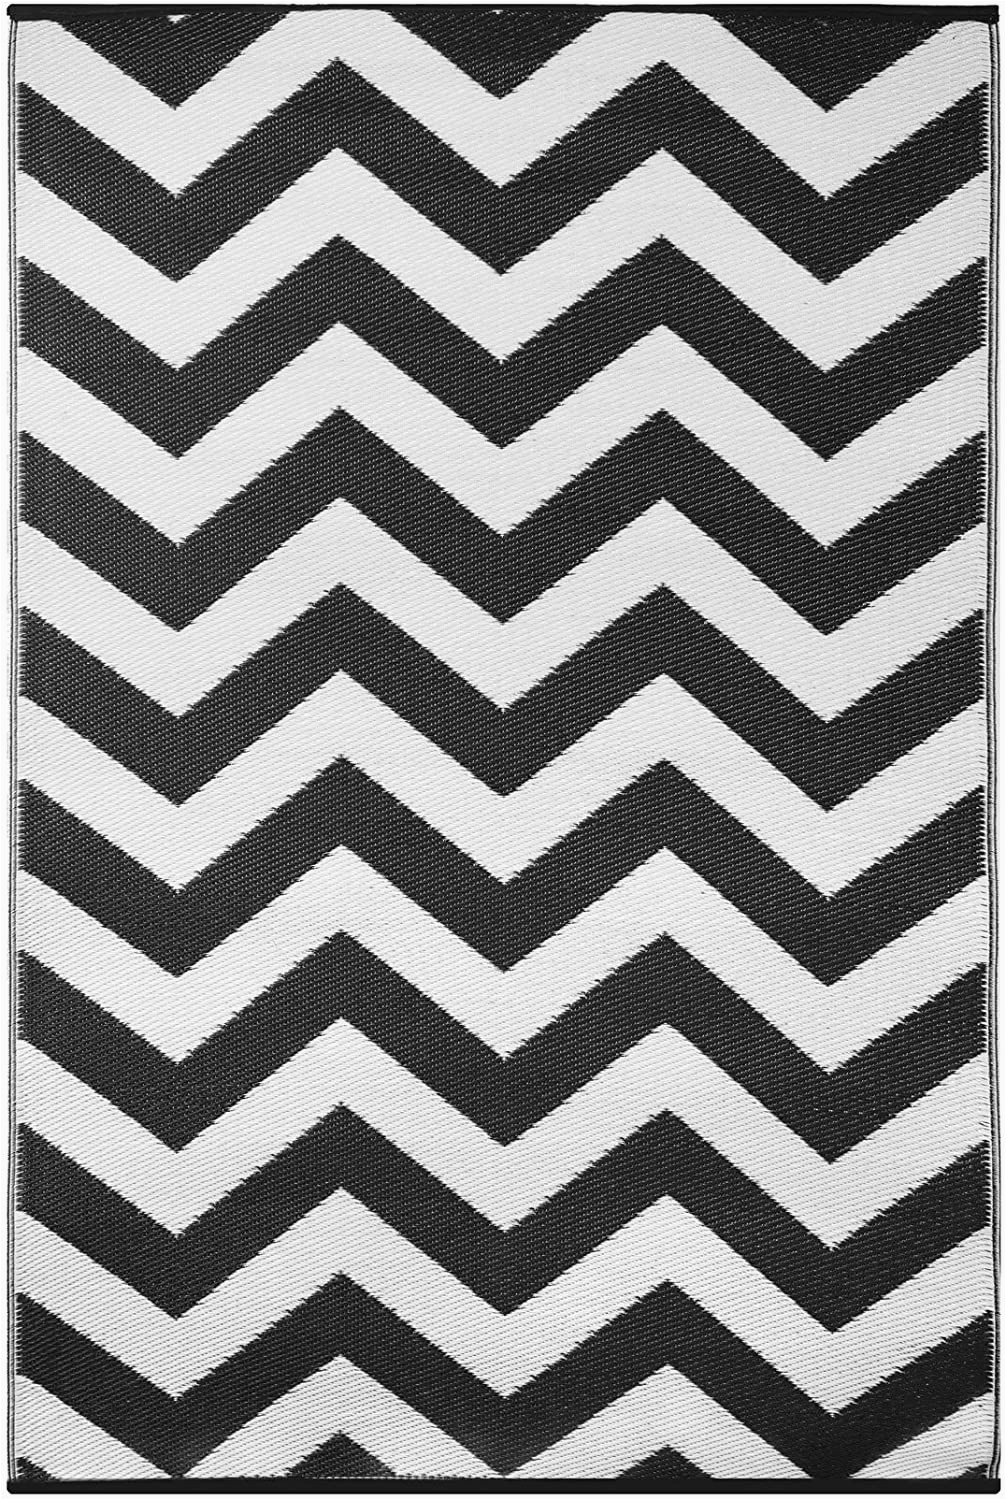 Black and White area Rugs 3×5 Green Decore Lightweight Indoor Outdoor Reversible Plastic Rug Psychedelia Black White 3×5 Ft 90 X 150cm Black White